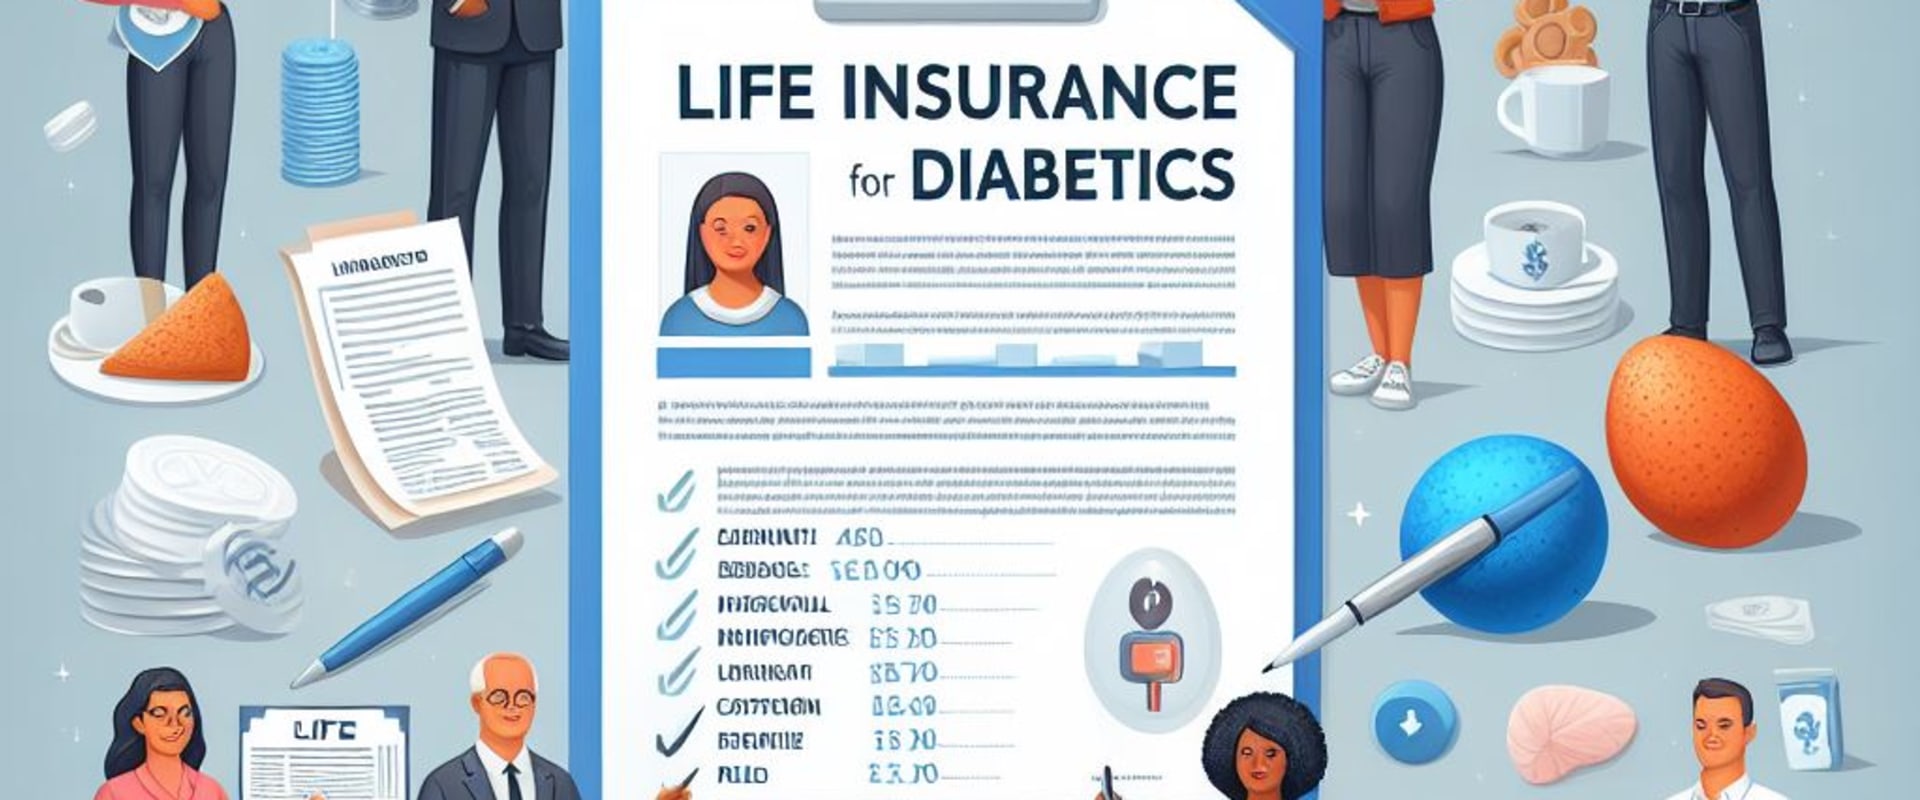 whole life insurance for type 1 diabetes